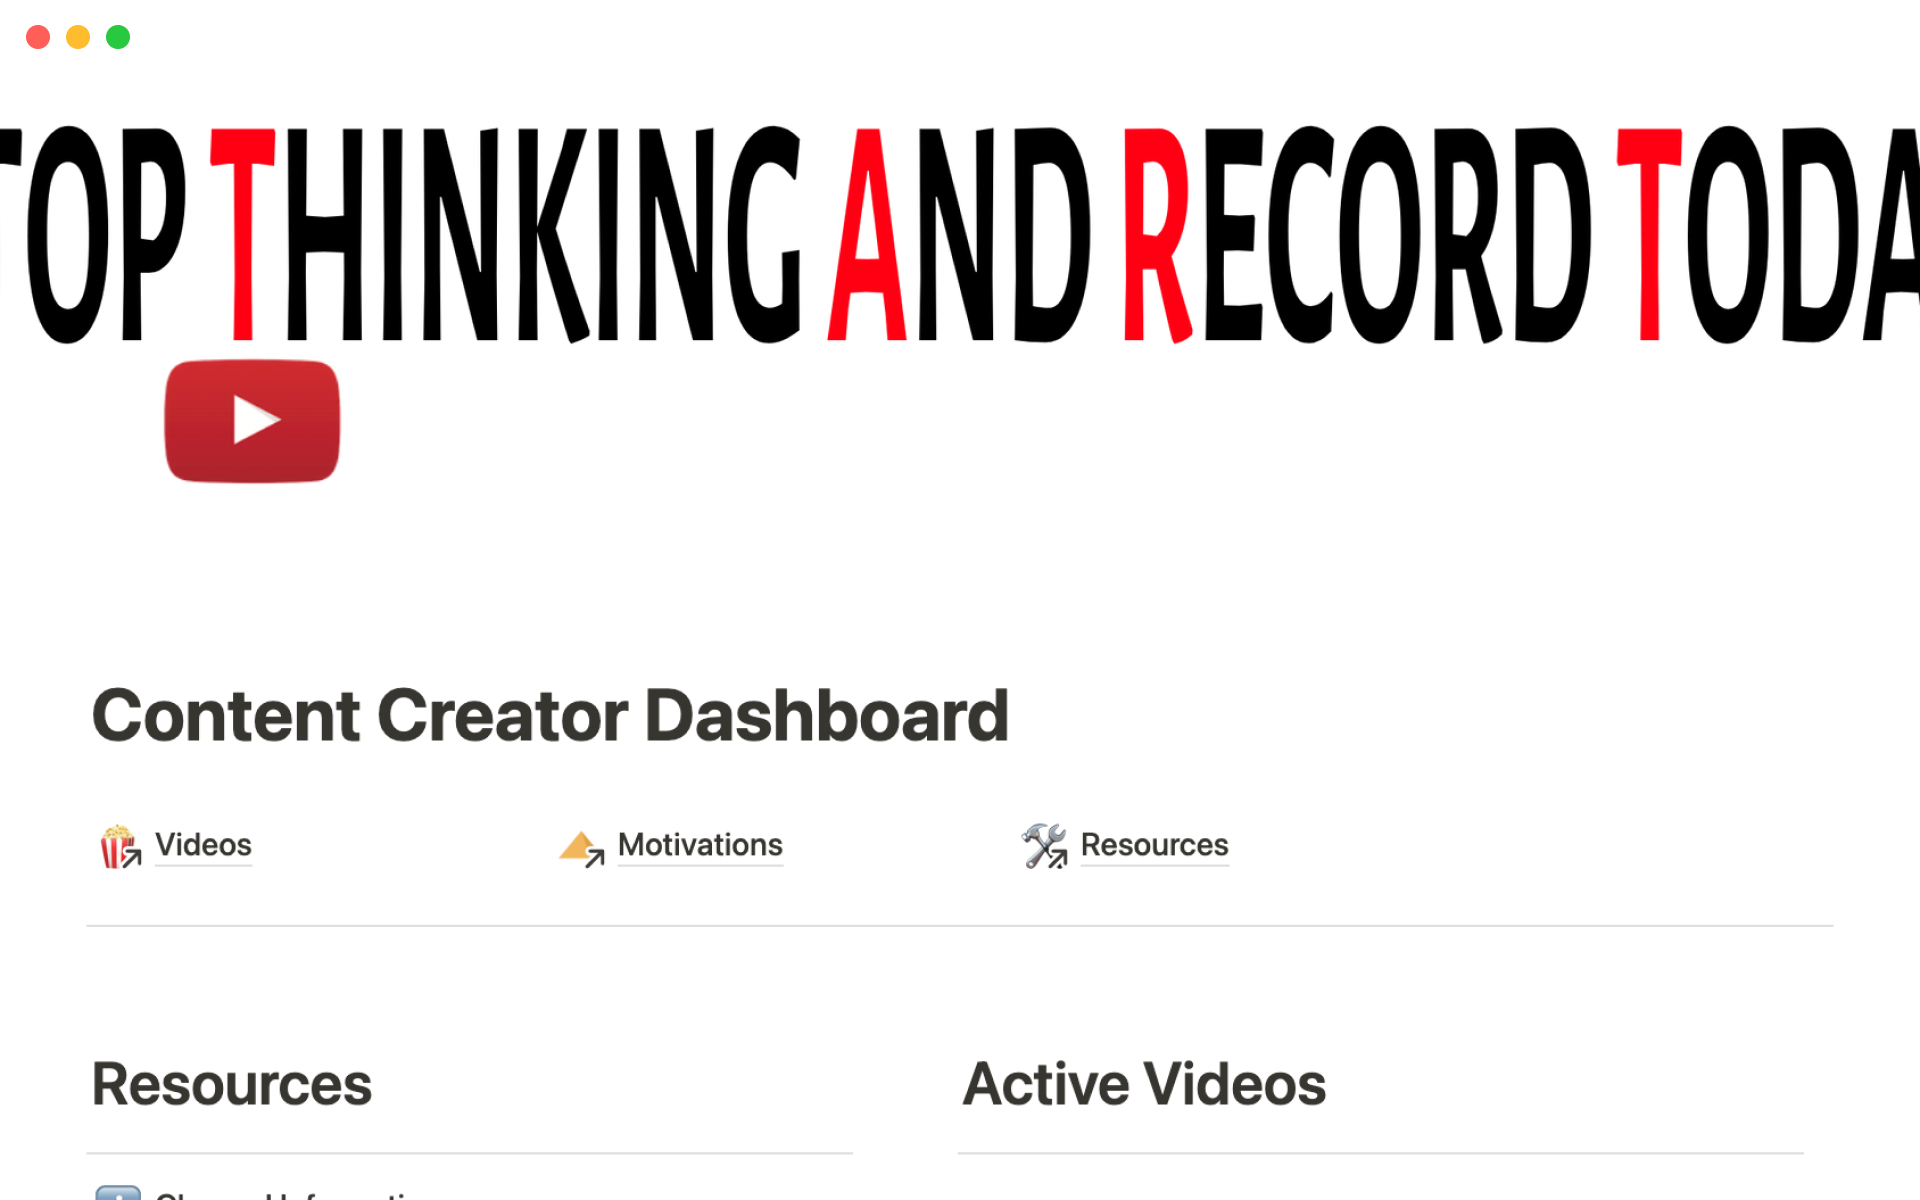 An organized approach to viewing all of your projects, video ideas, and everything related to video production.